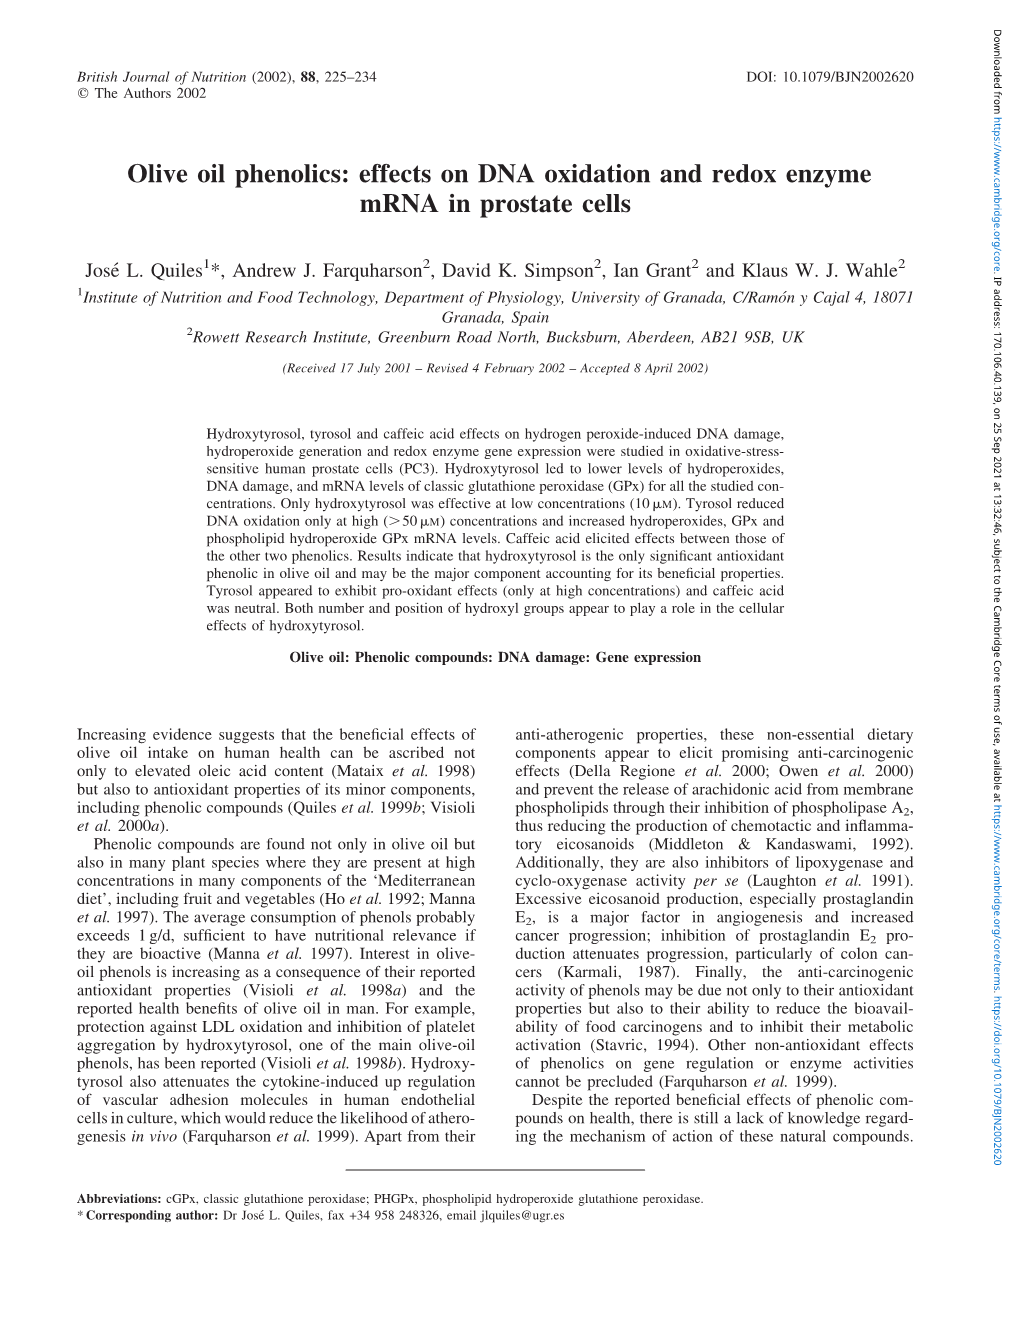 Effects on DNA Oxidation and Redox Enzyme Mrna in Prostate Cells